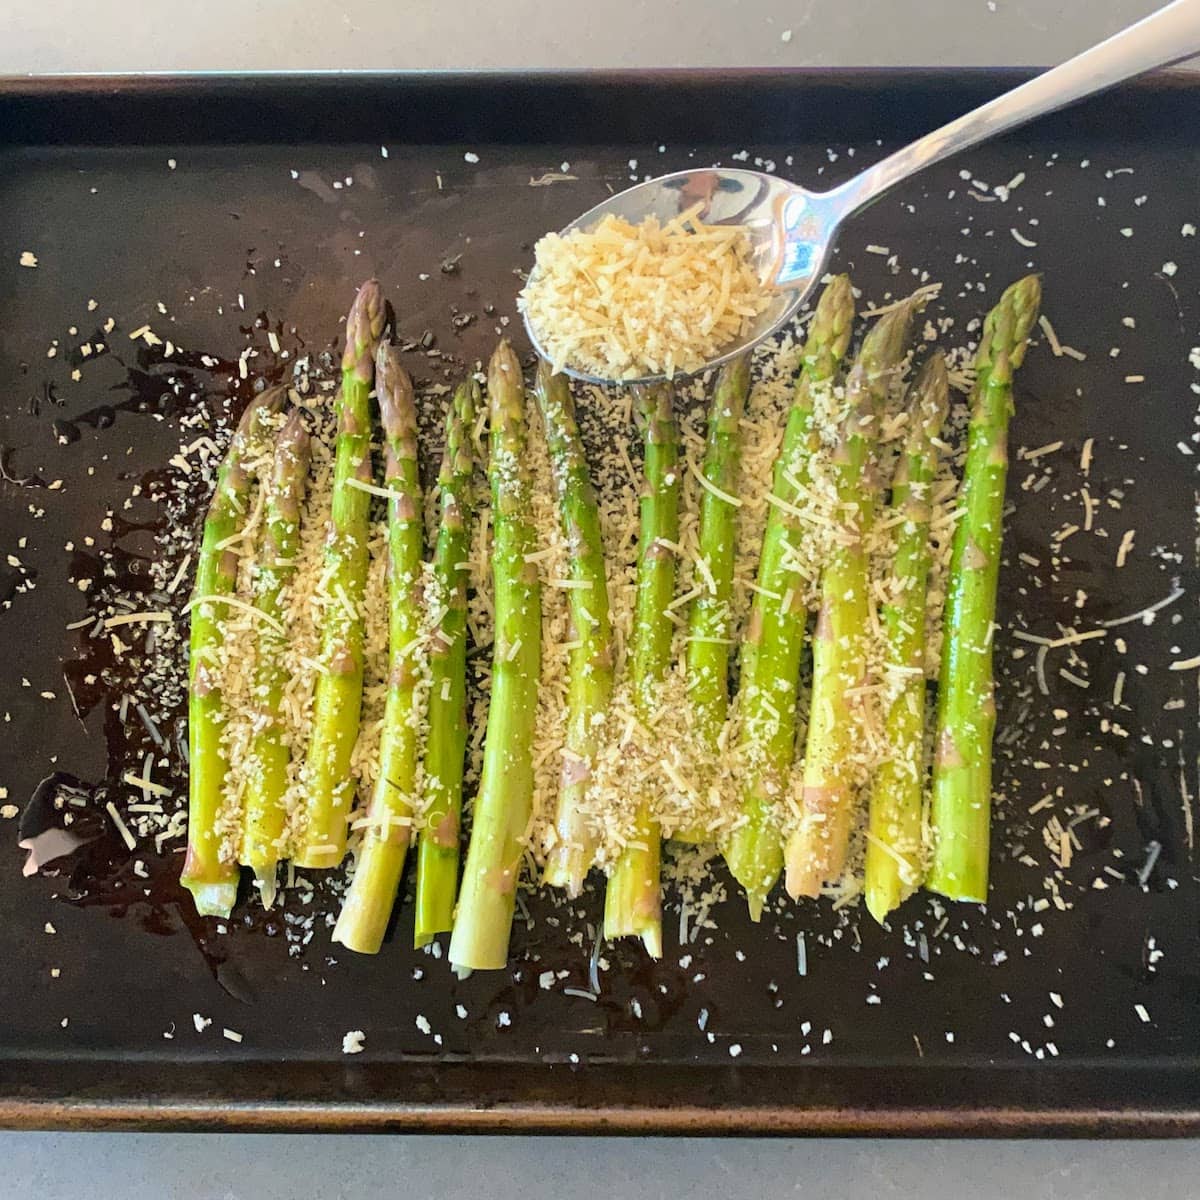 pouring parmesan panko mix over the asparagus in pan